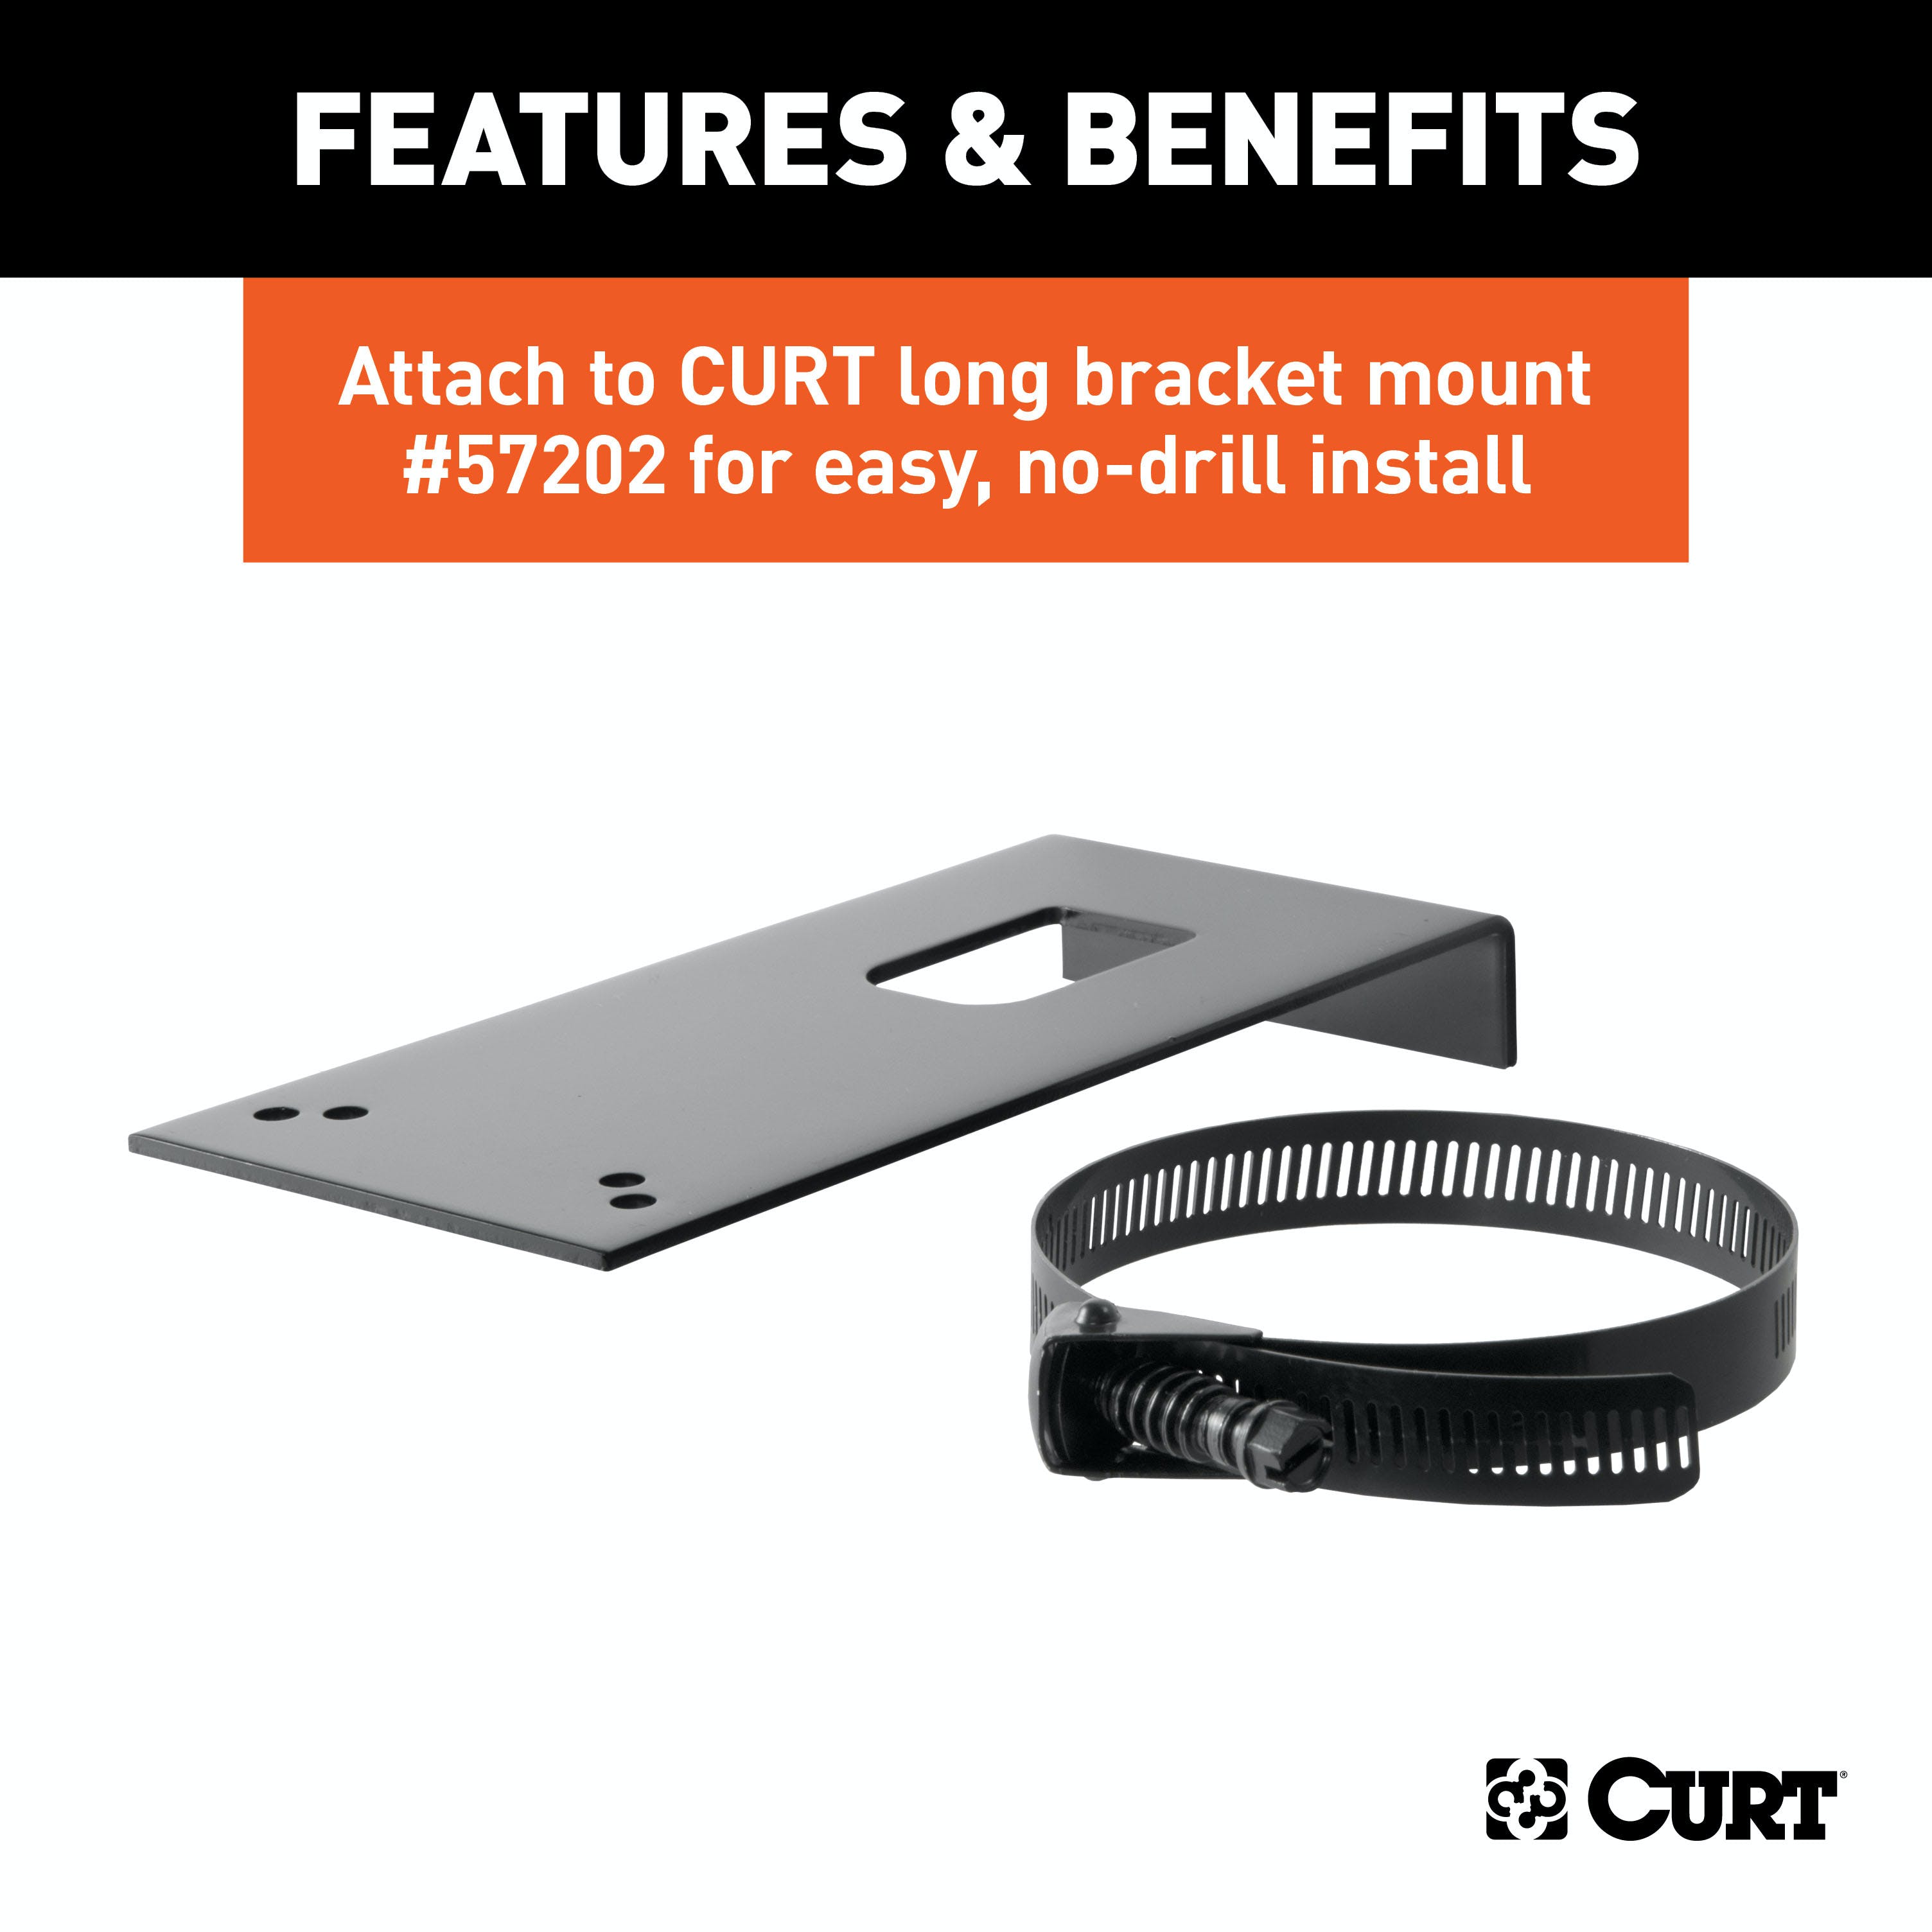 CURT 58520 Connector Mounting Bracket for 7-Way USCAR Socket